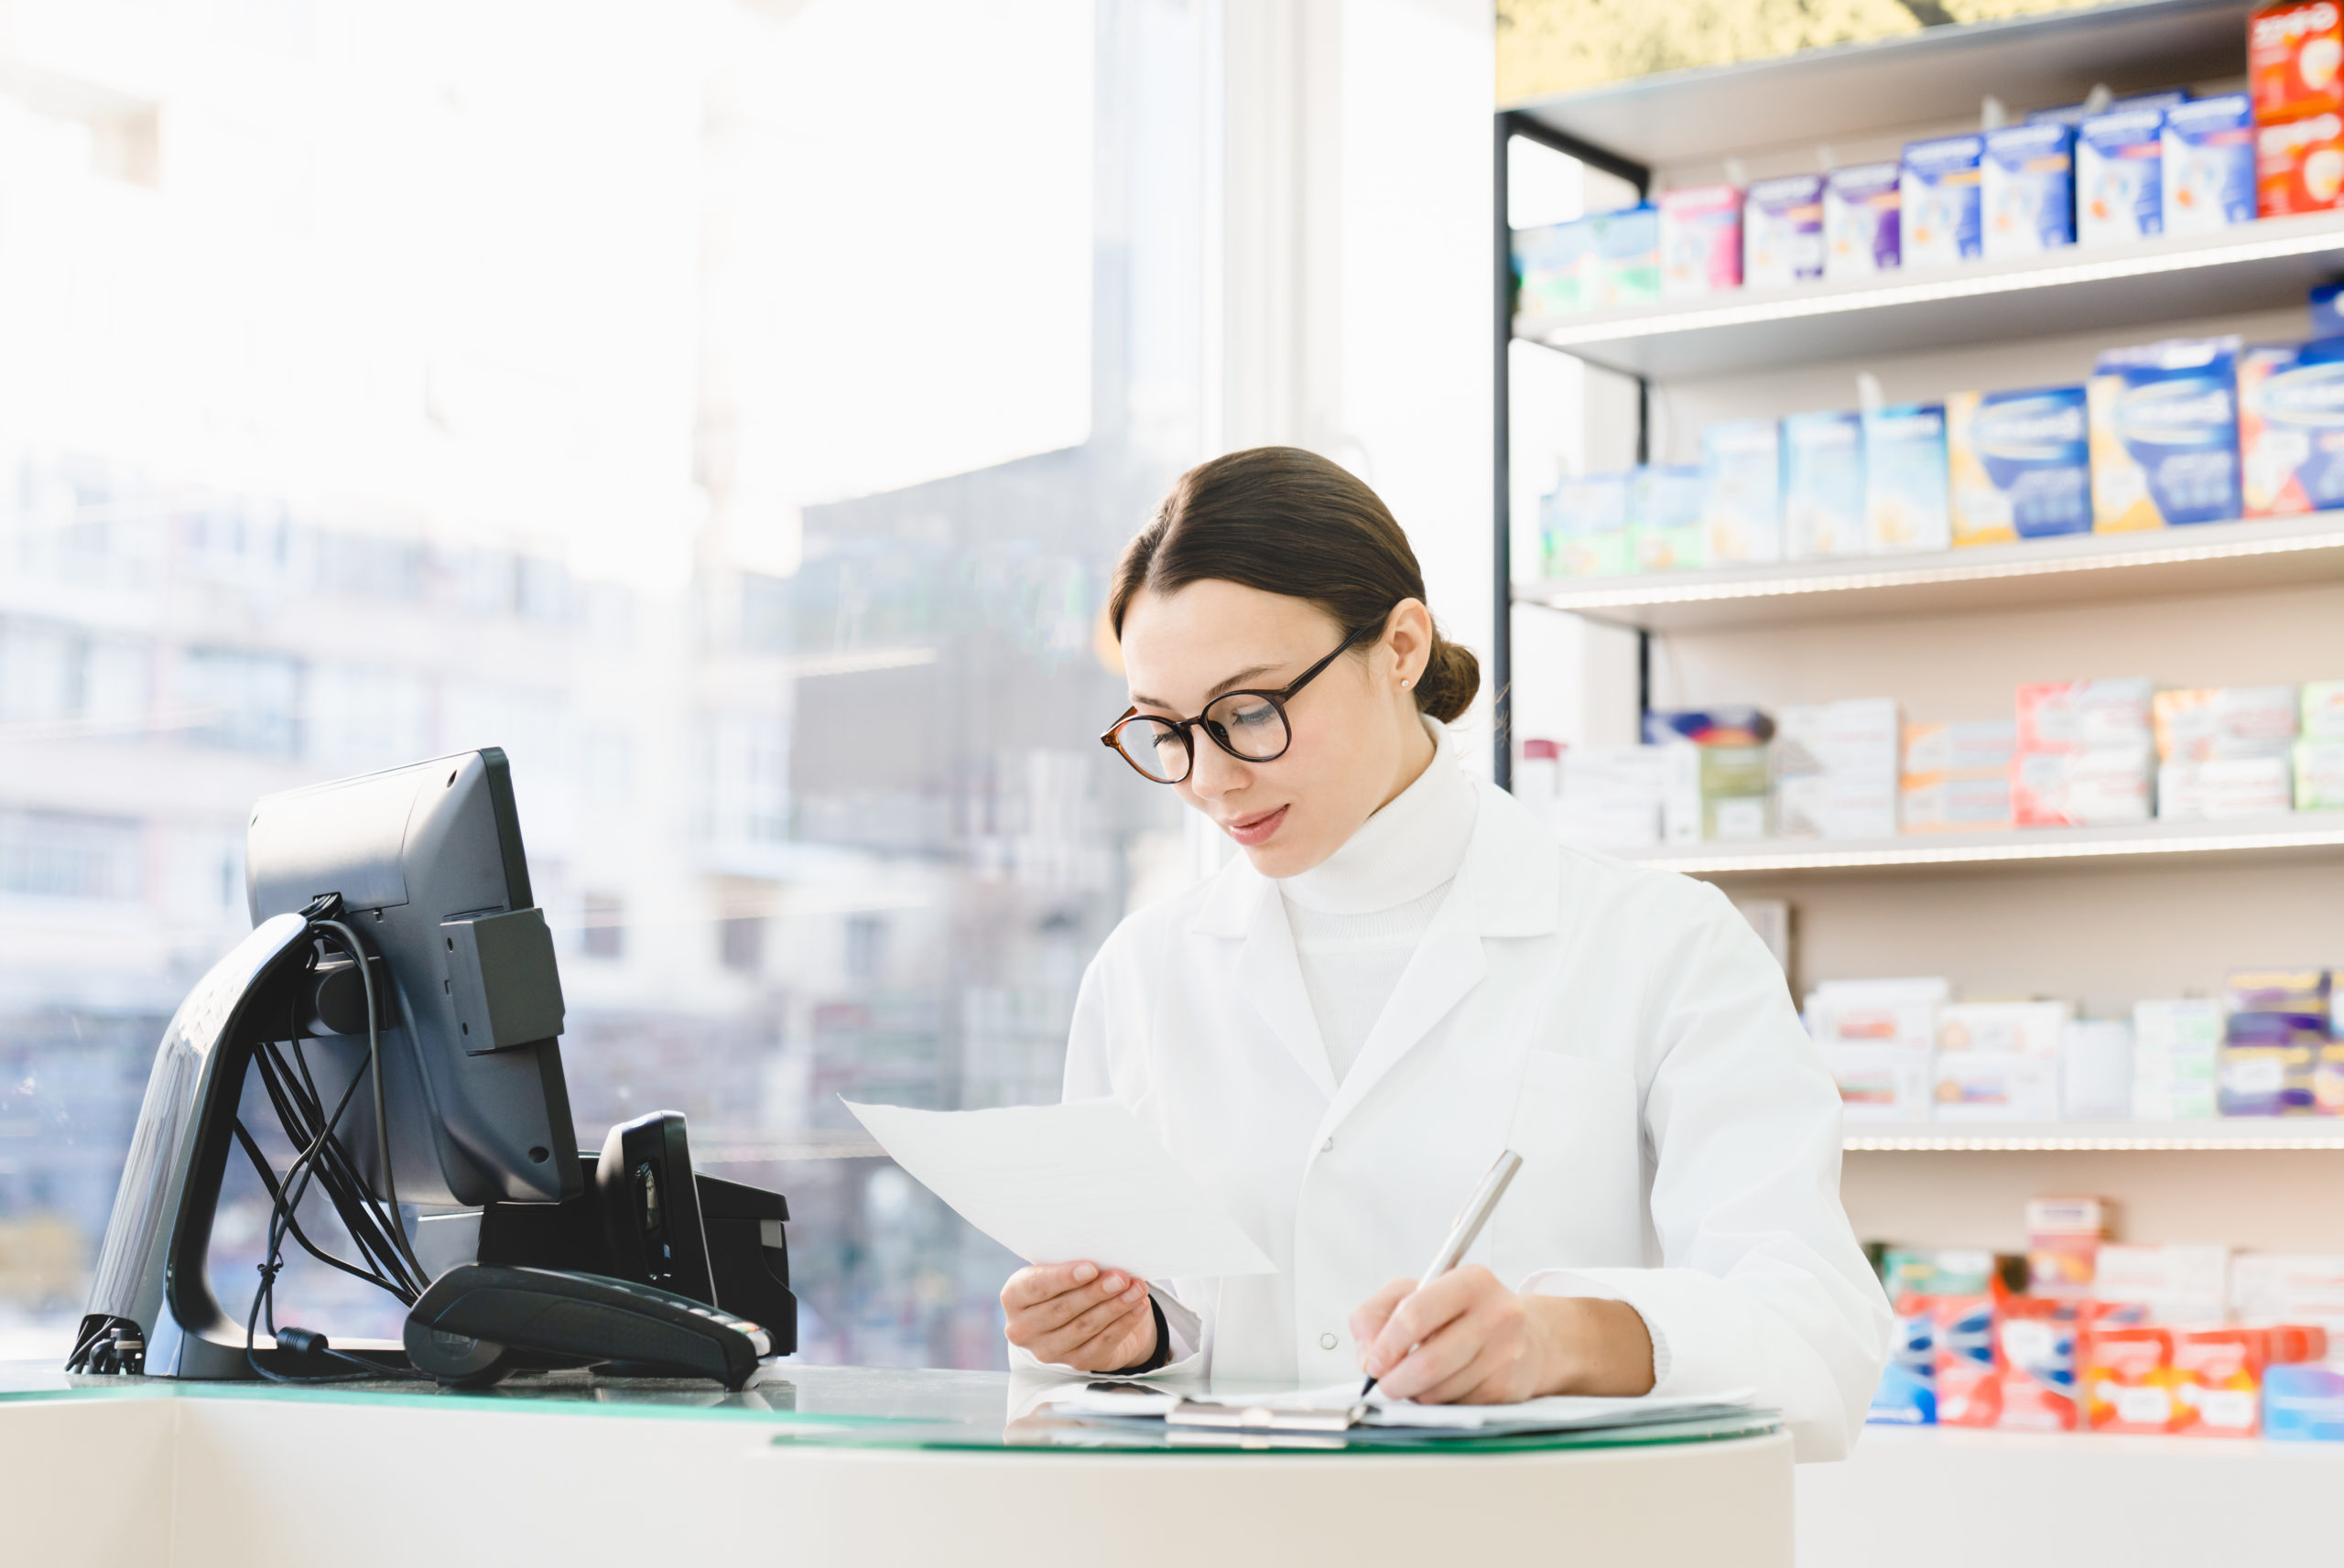 Druggist Checking Writing Information About Medicines Pills Remedies On Prescription In Pharmacy - KAPCON CONTABILIDADE